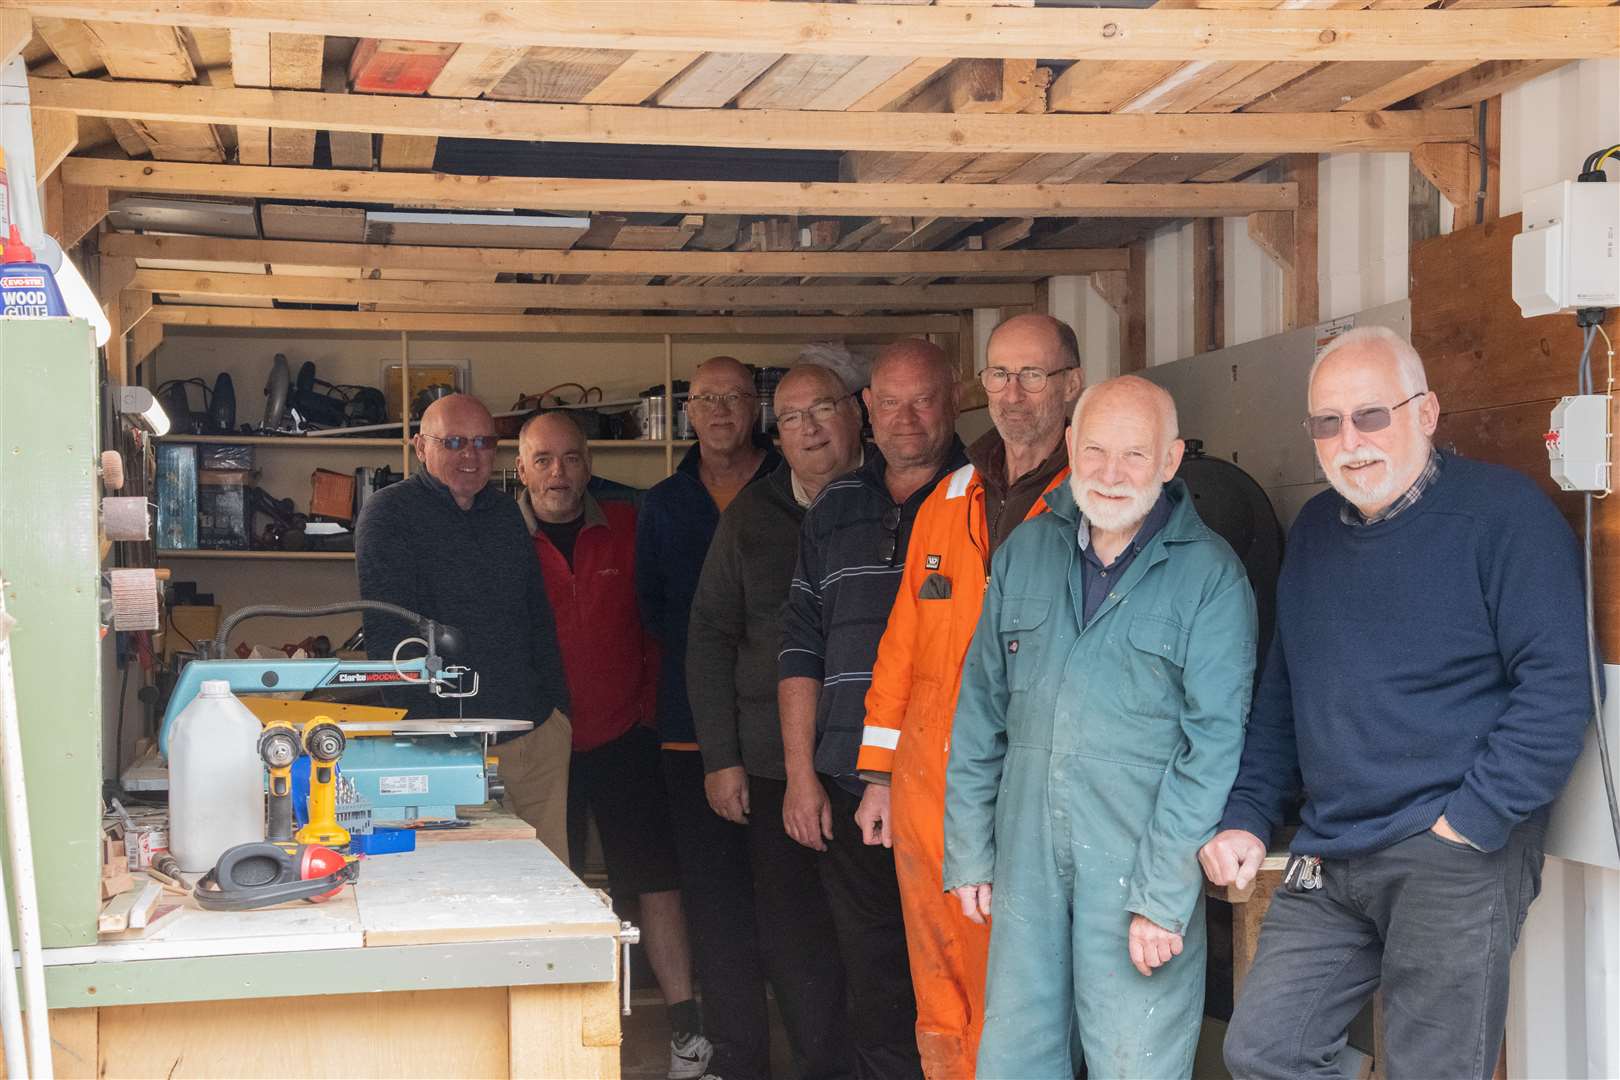 Once power is installed the Men's Shed will be able to operate facilities such as this new workshop. Picture: Daniel Forsyth